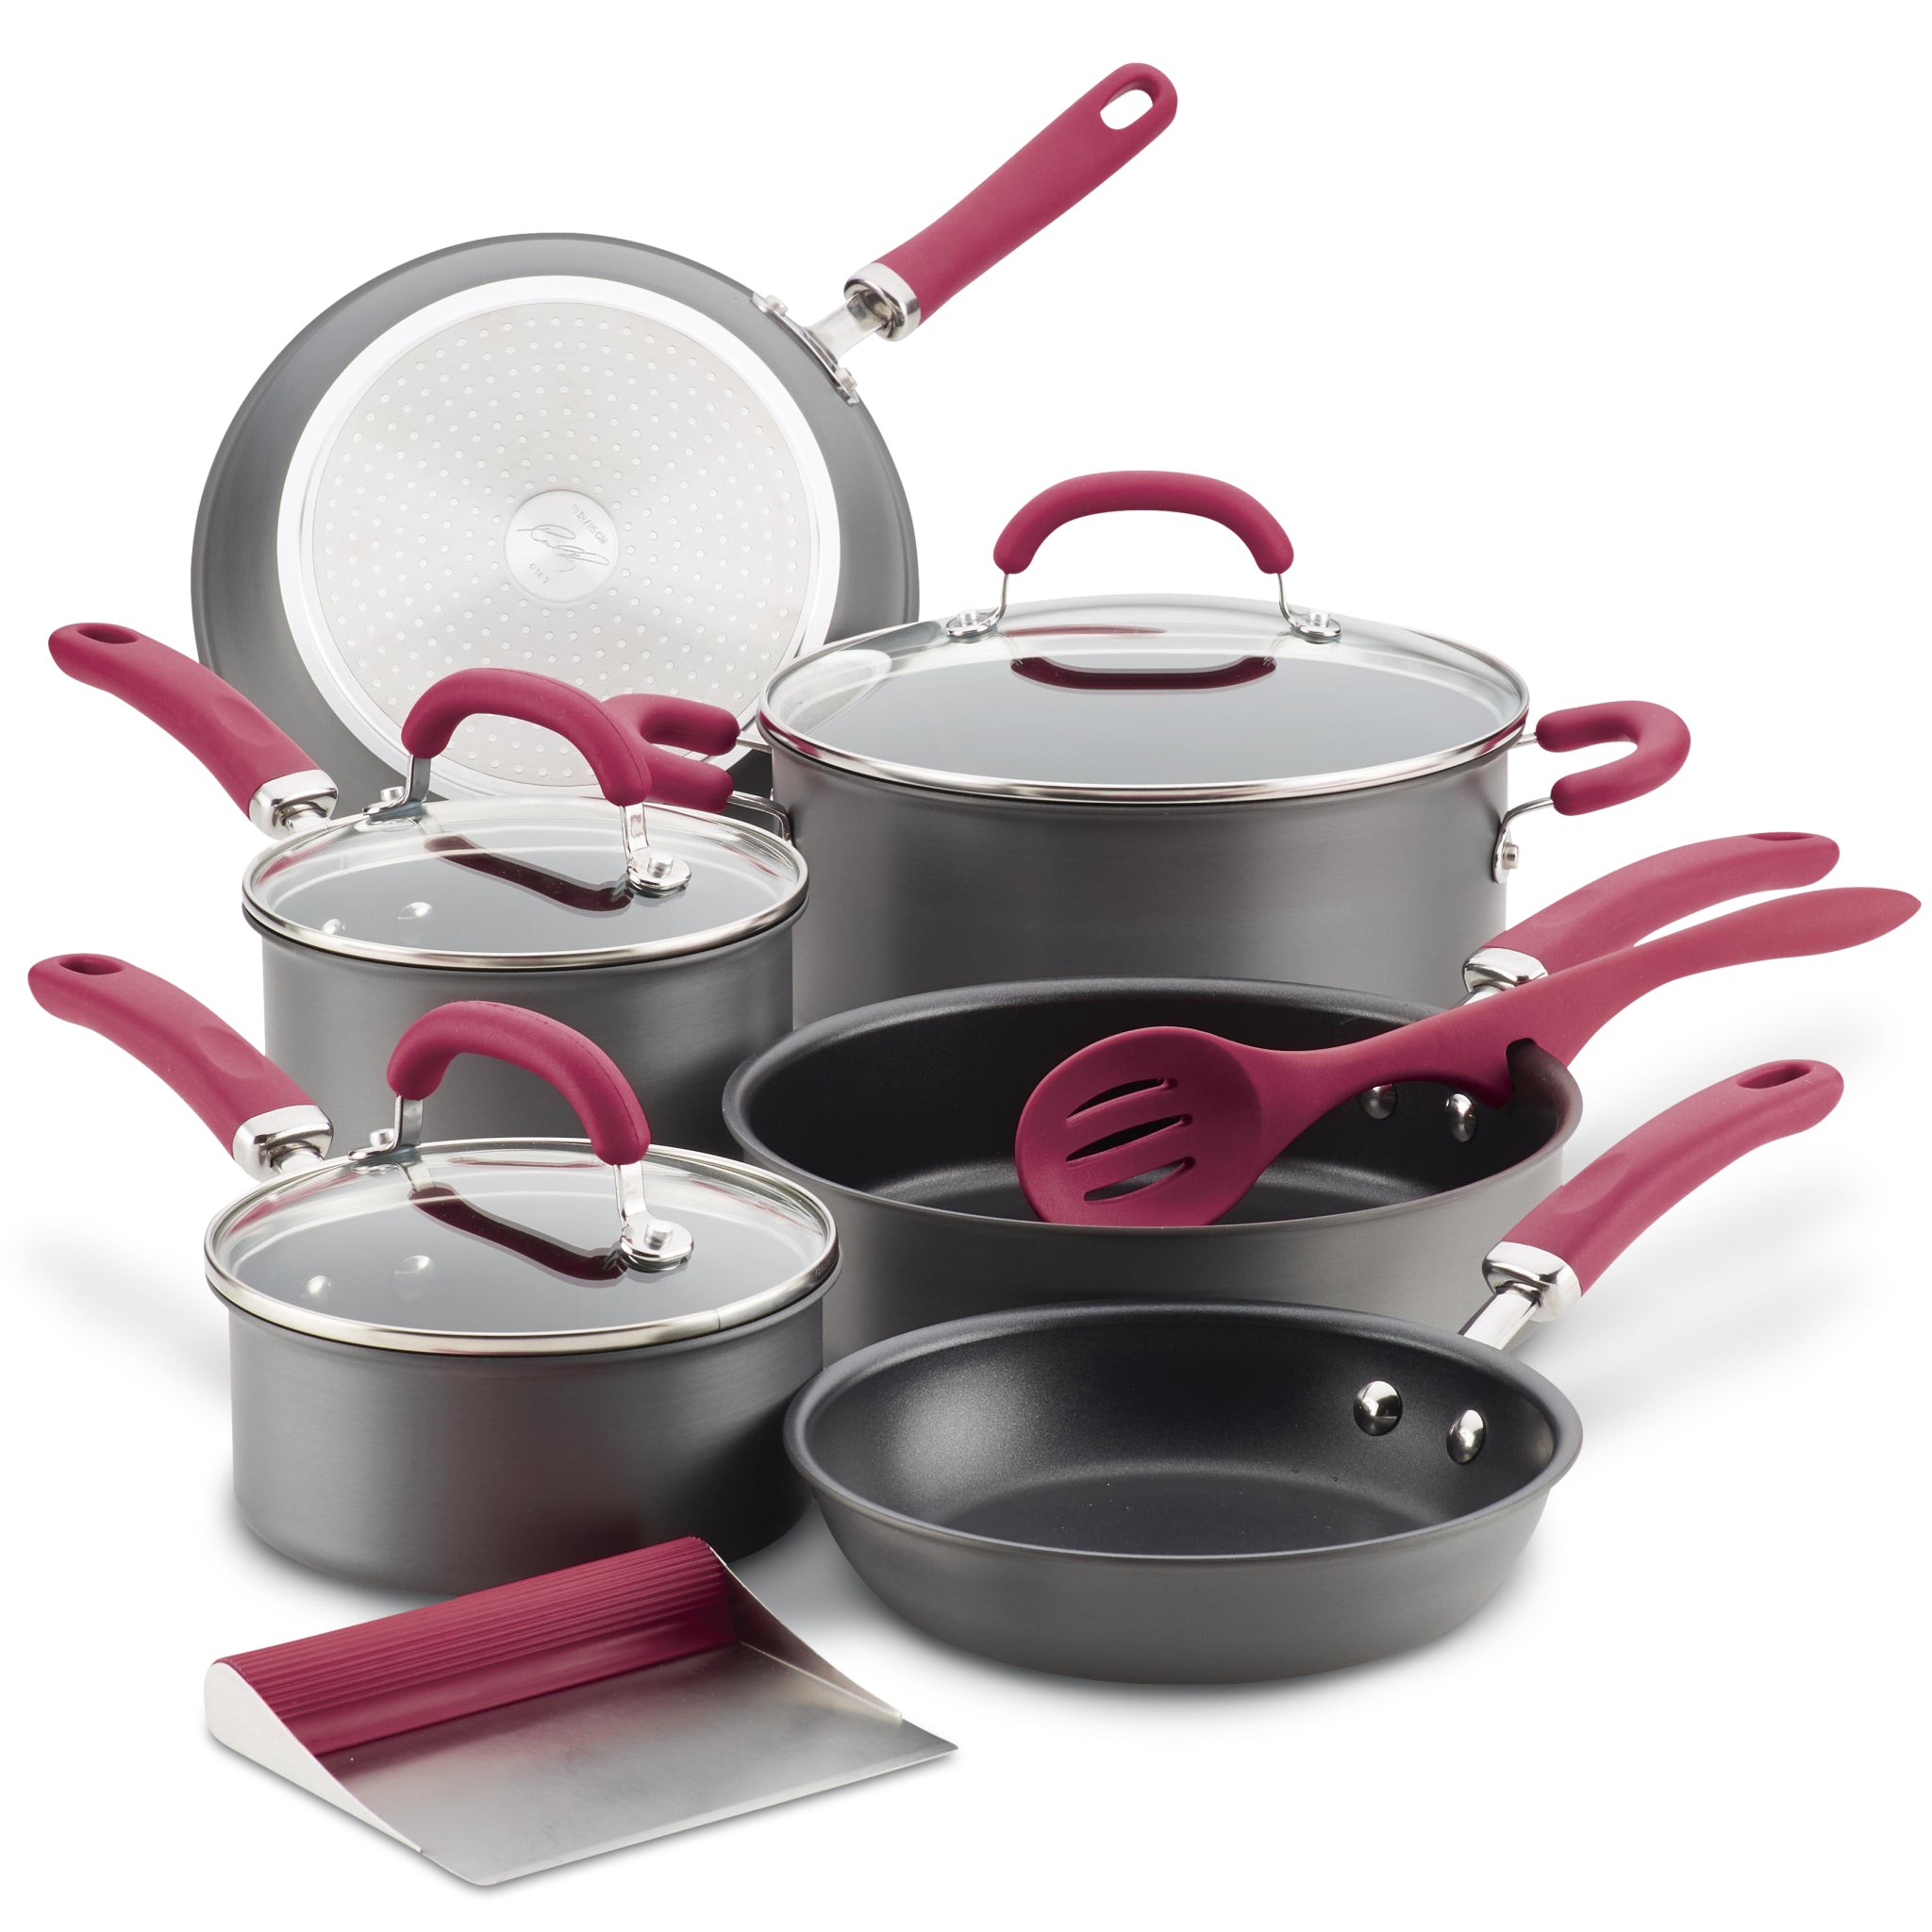 11-Piece Hard Anodized Nonstick Induction Cookware Set